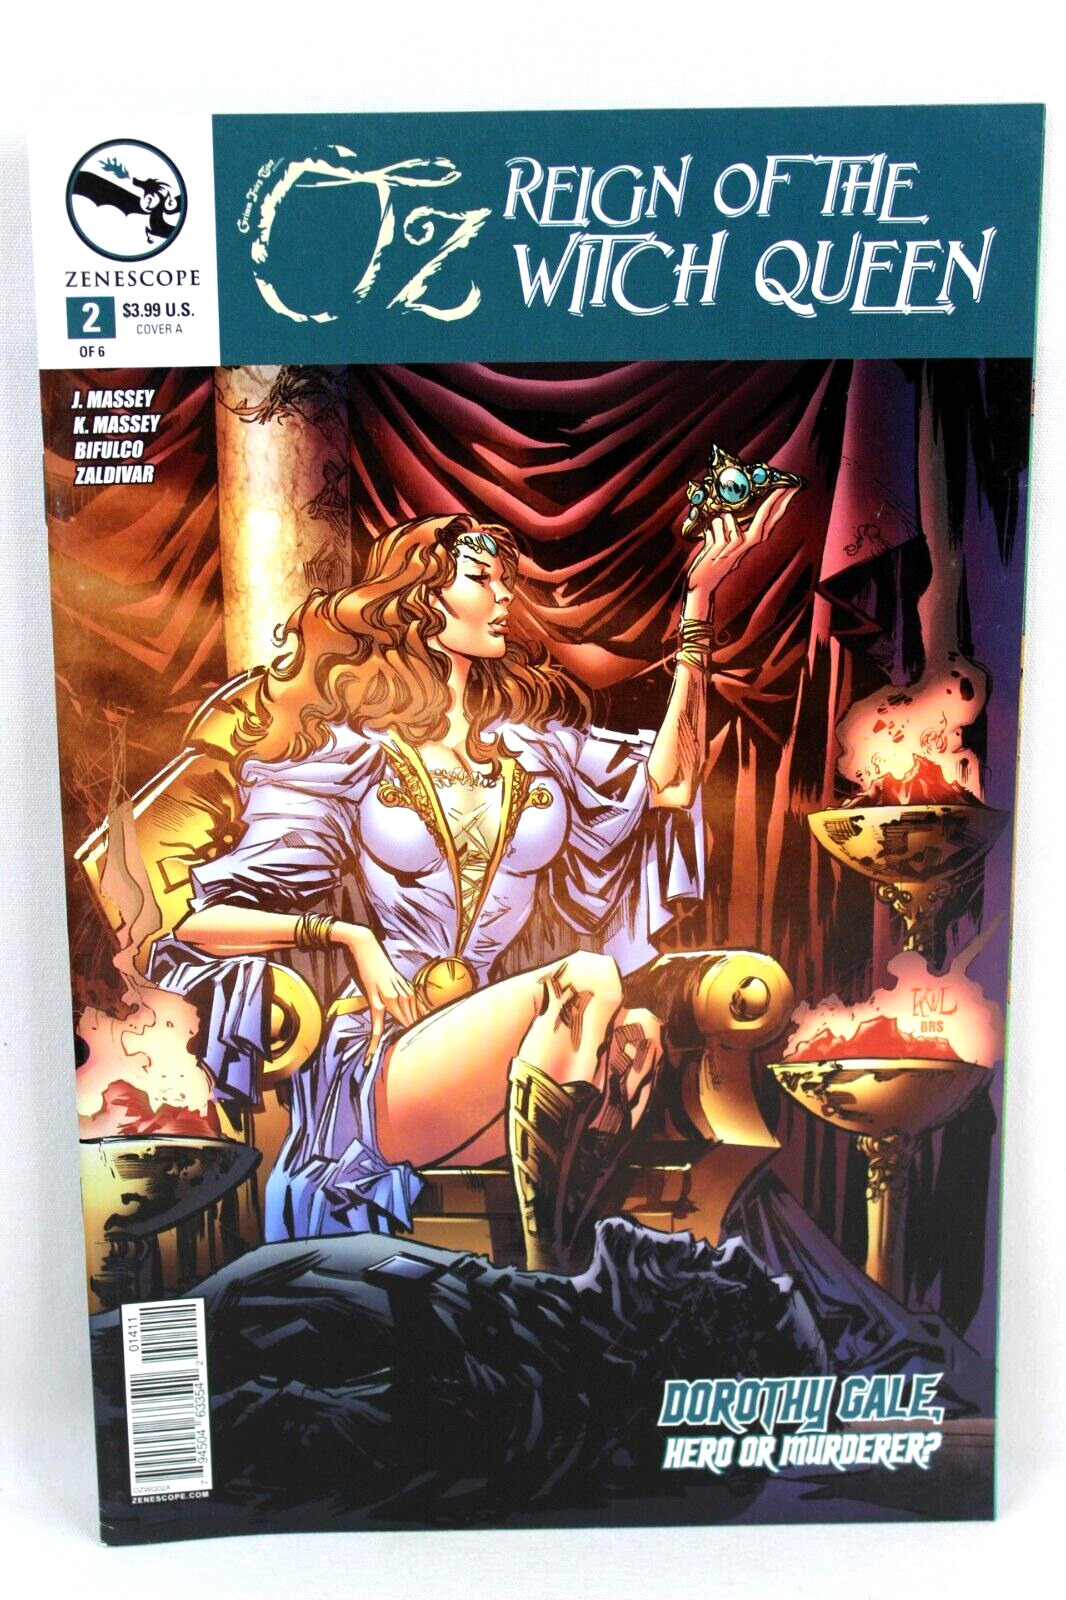 Oz Reign of the Witch Queen #2 Ken Lashley Cover A 2015 Comic Zenescope F/F+